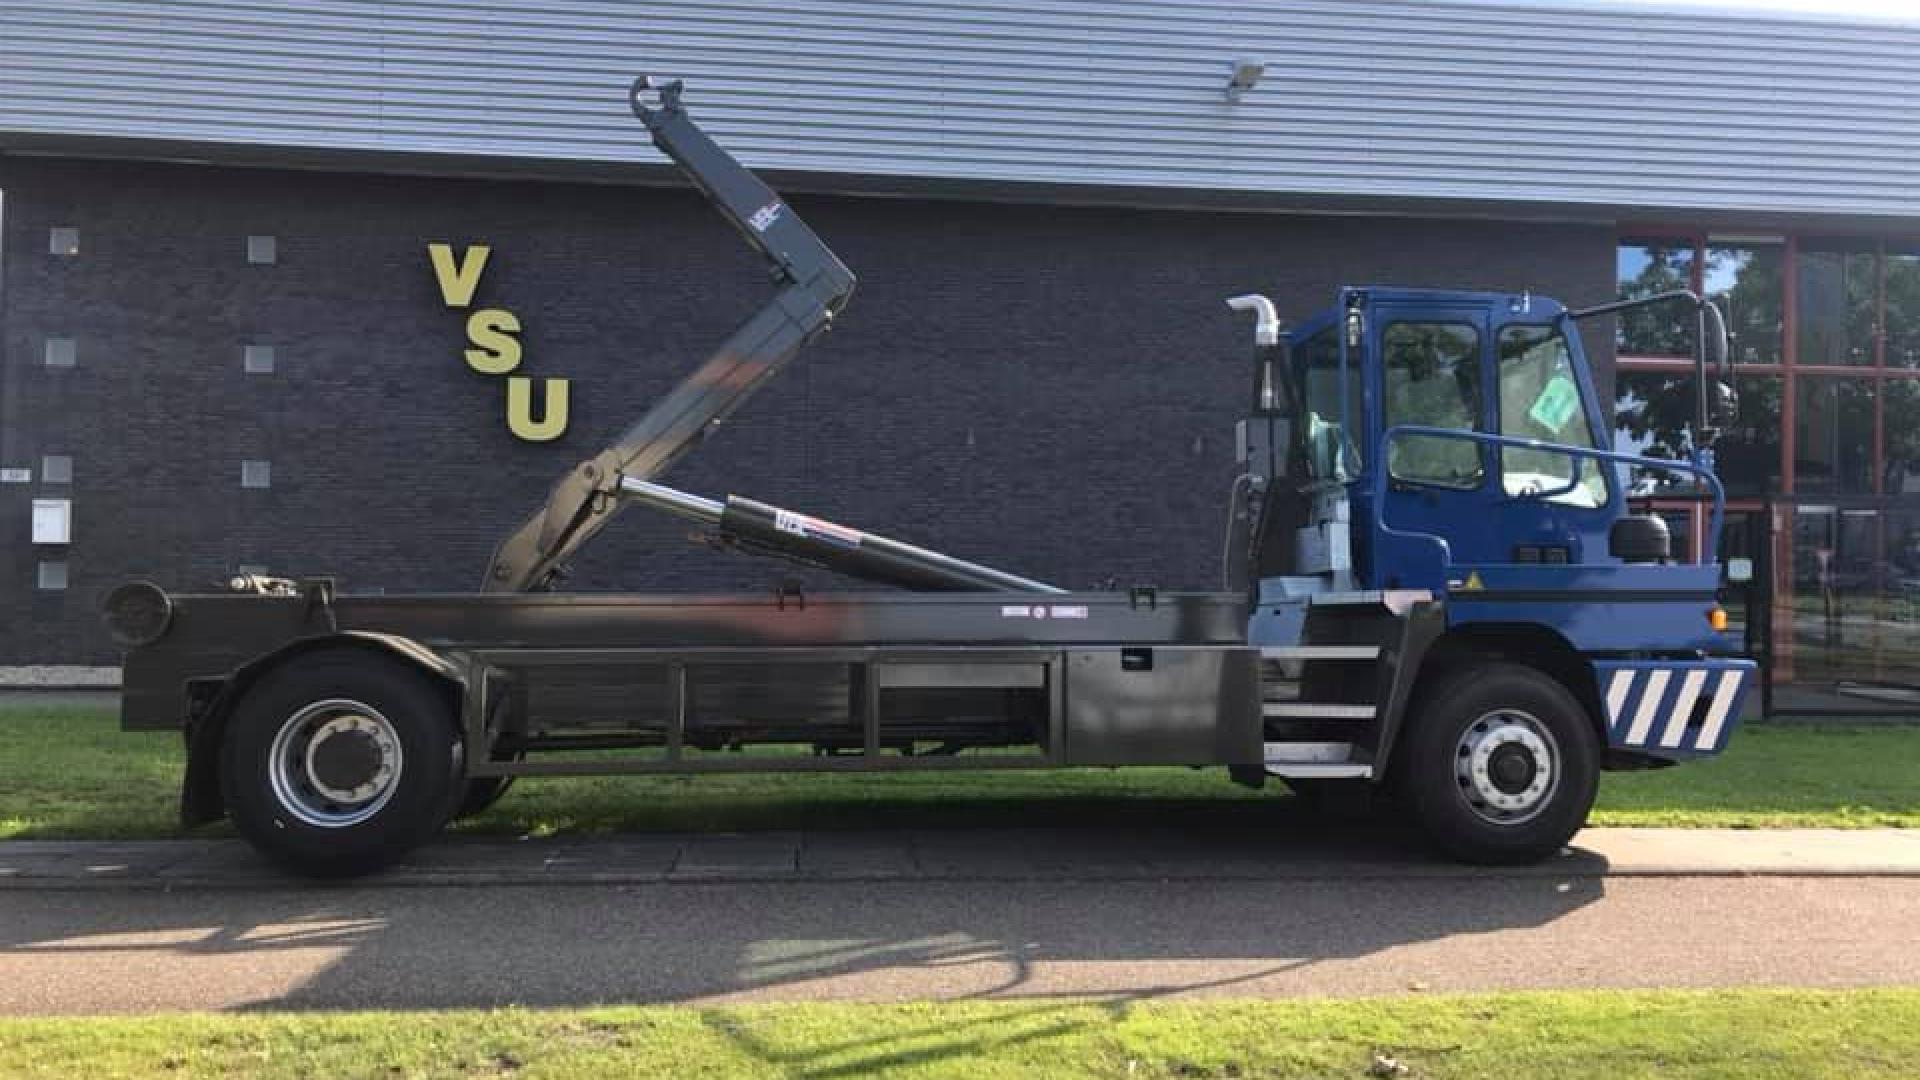 VSU builds VDL hooklift installation on a terminal tractor vehicle.